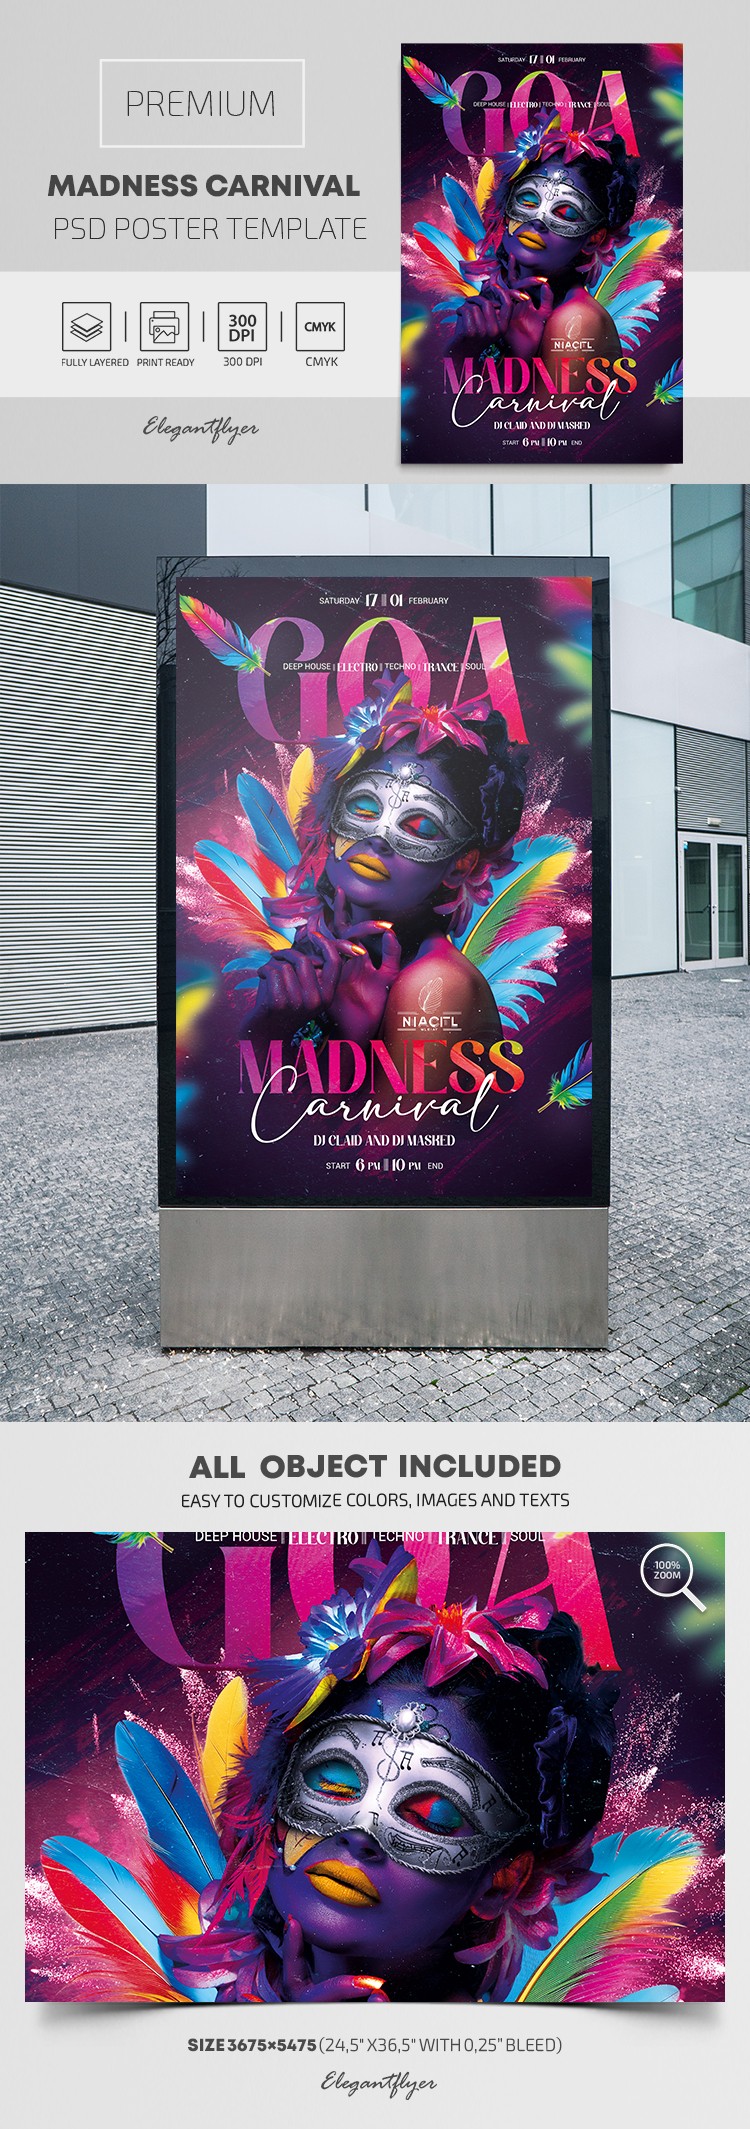 Multicolor Colorful GOA madness Carnival Premium Poster Template PSD | by  Elegantflyer